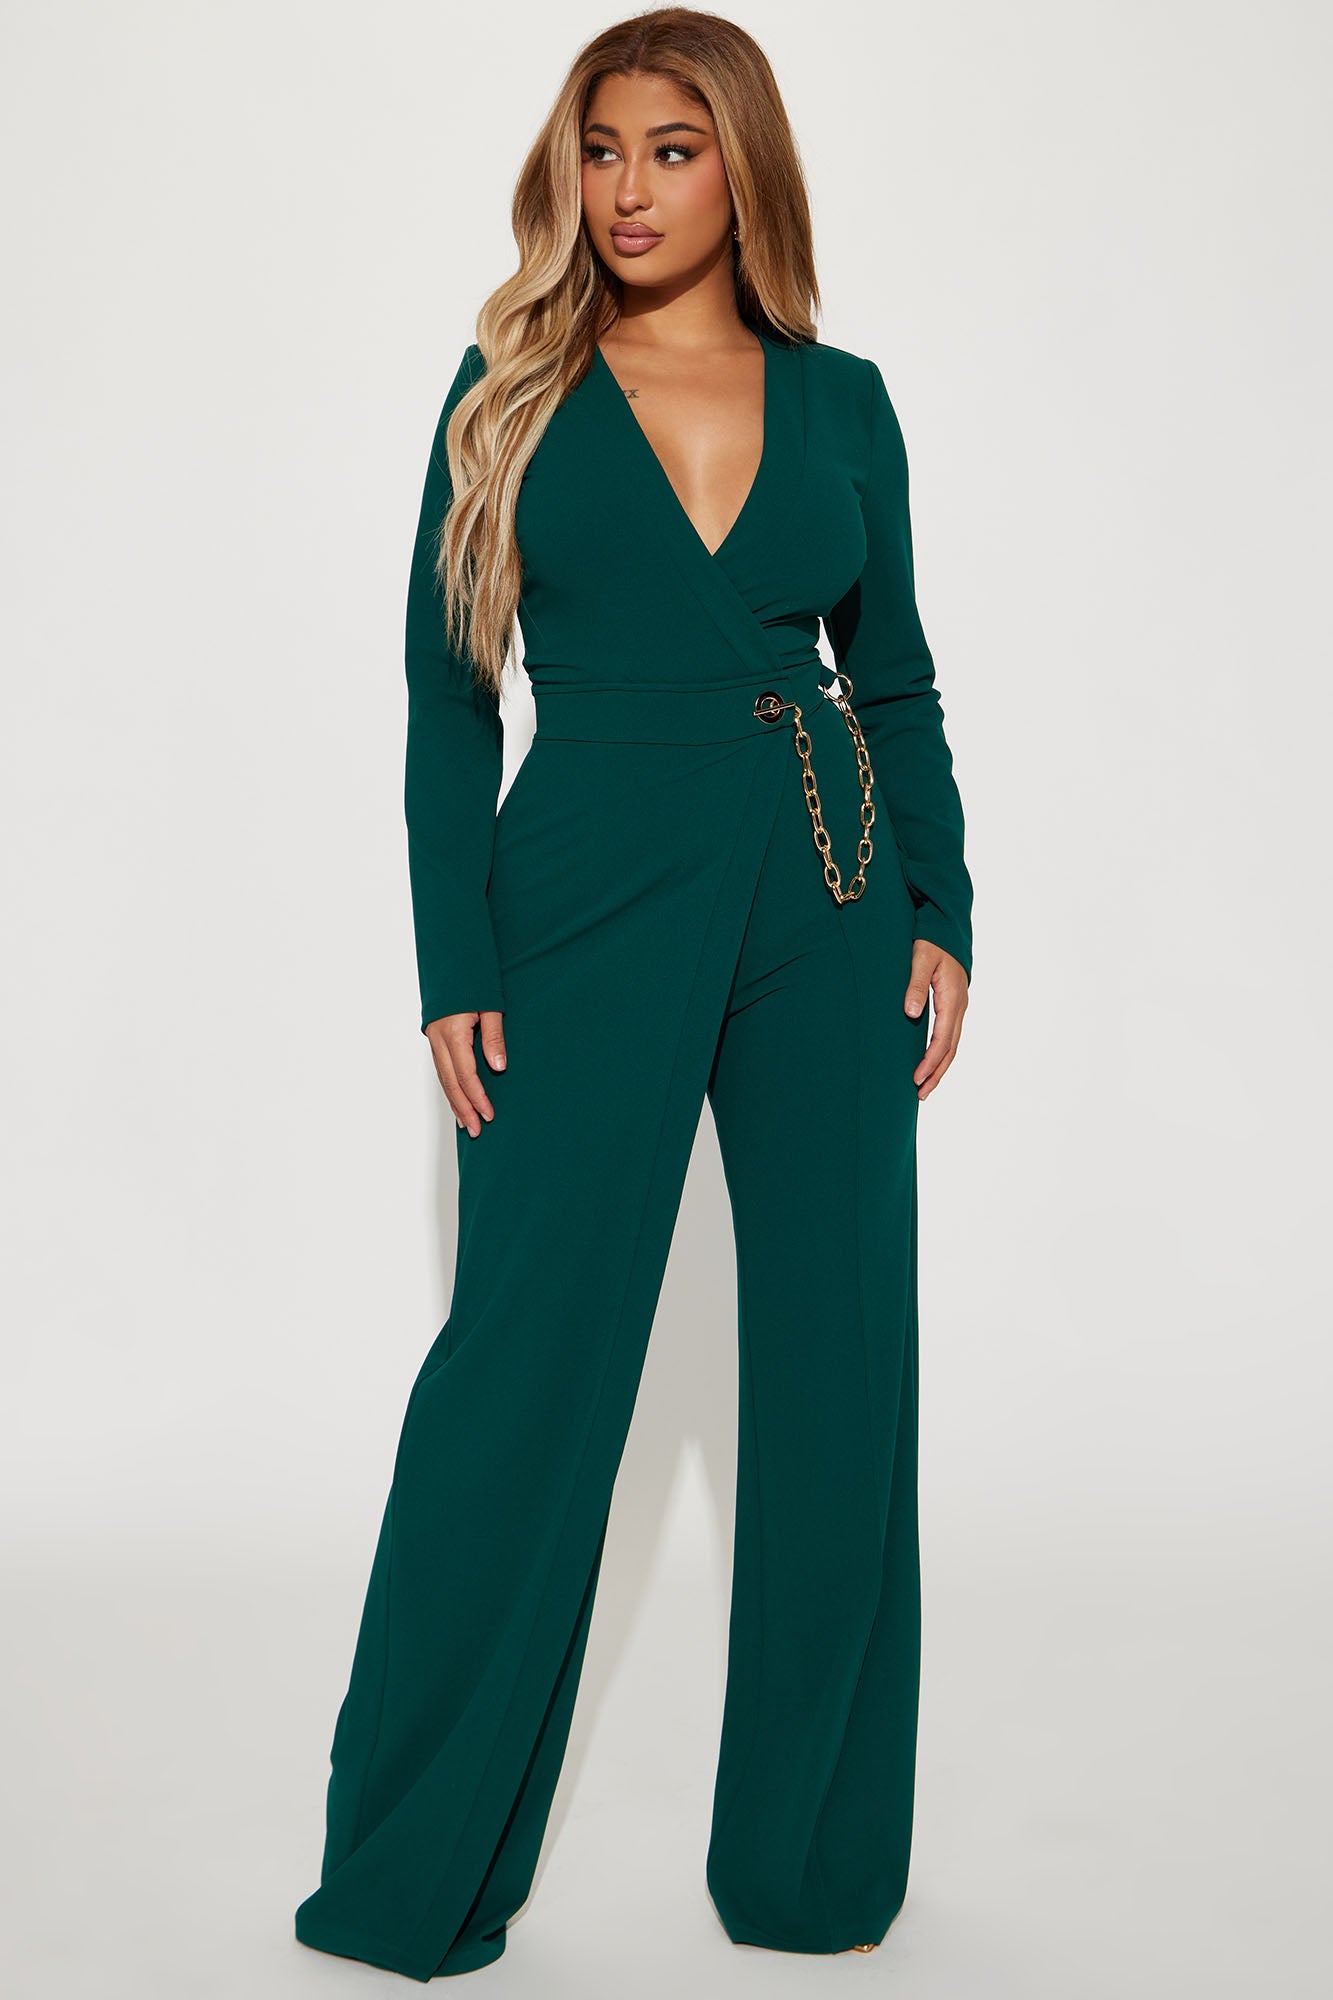 Sexy Emerald Green Hoodie Womens Jumpsuit With Zipper, V Neck, And Long  Sleeves For Autumn/Winter From Zhenhuang, $25.61